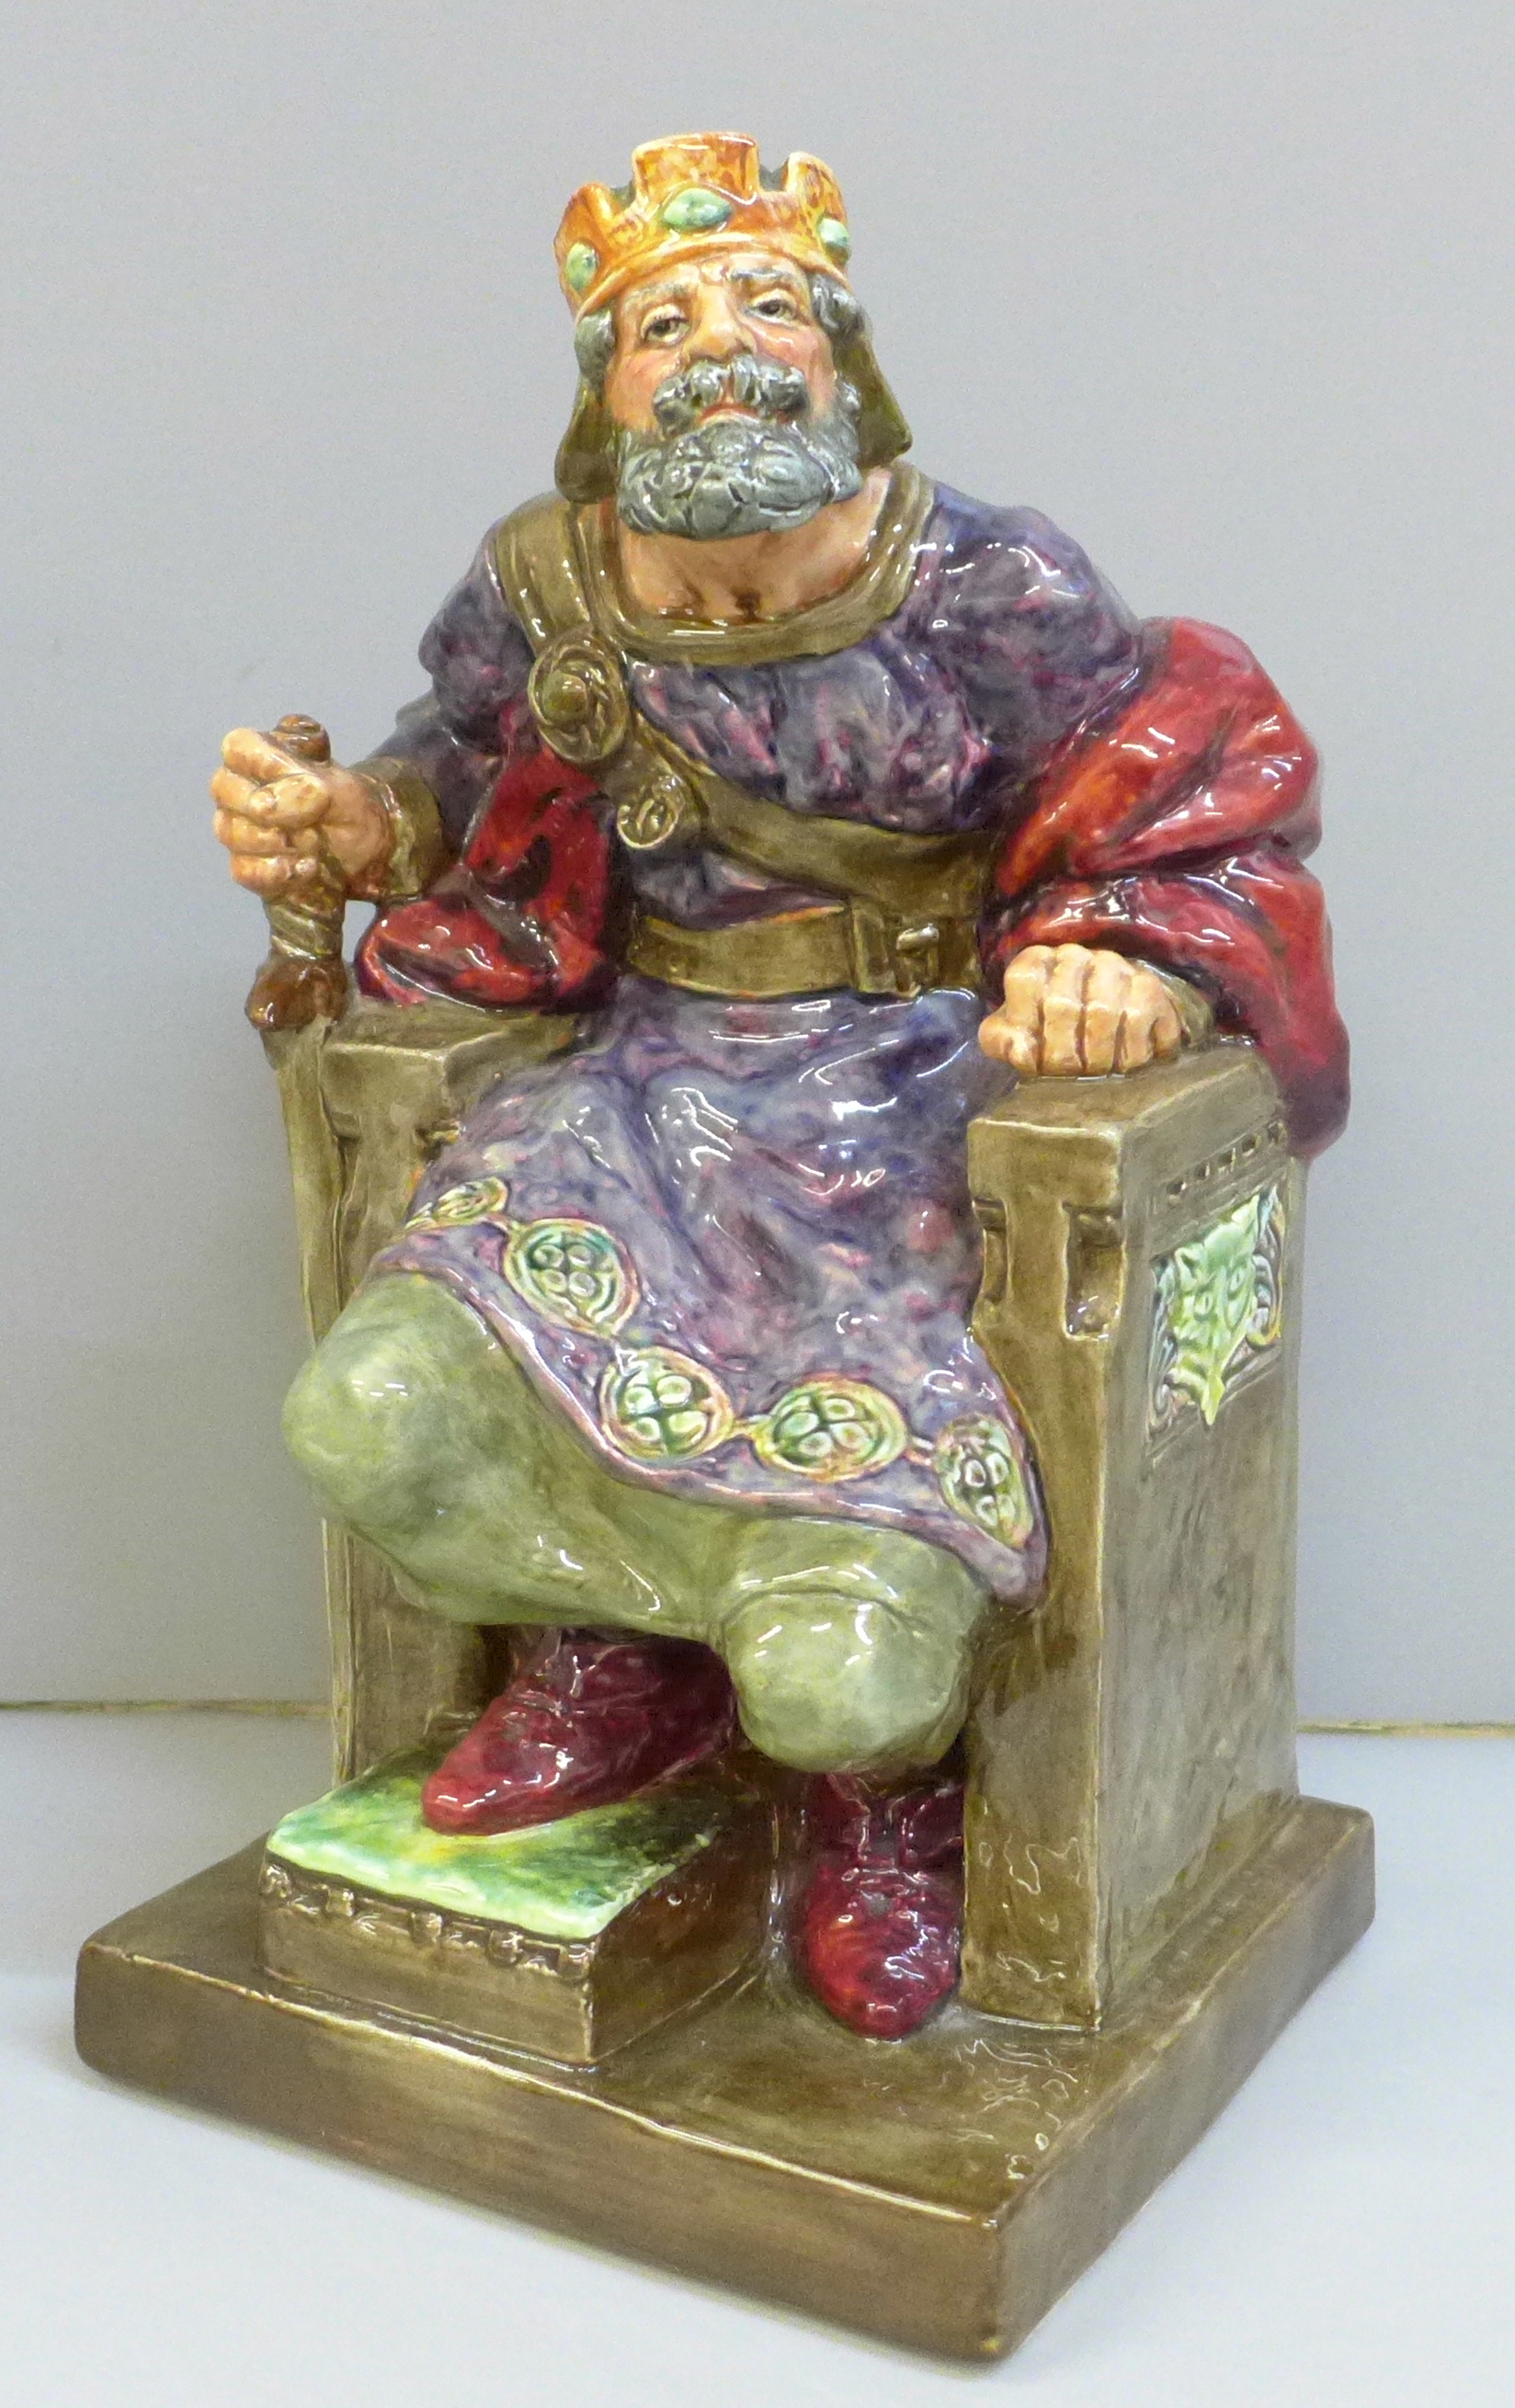 A Royal Doulton figure, The Old King, H2134